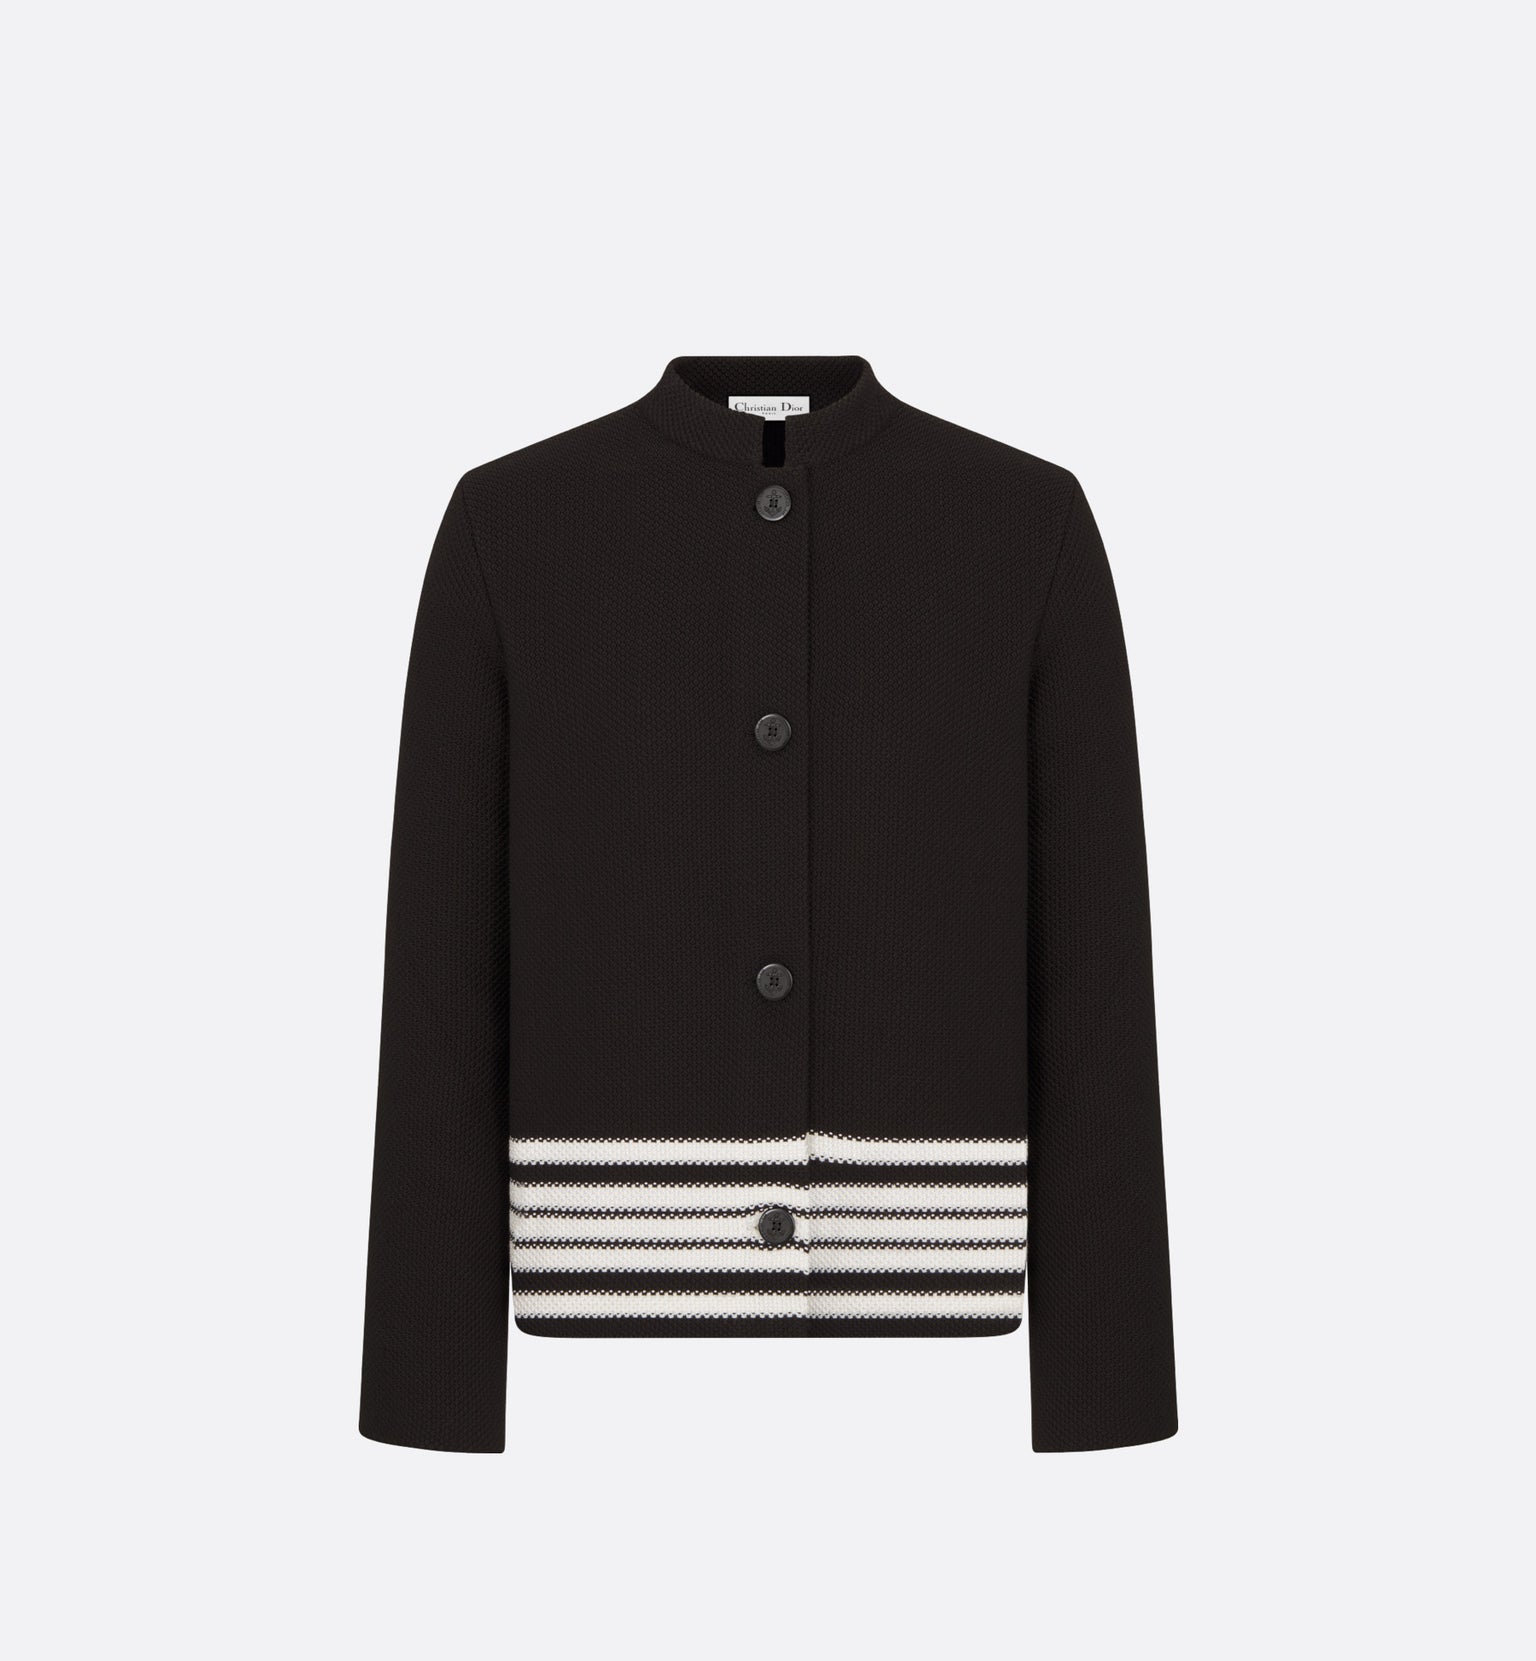 Dior Marinière Jacket • Black and White Cotton and Silk Knit